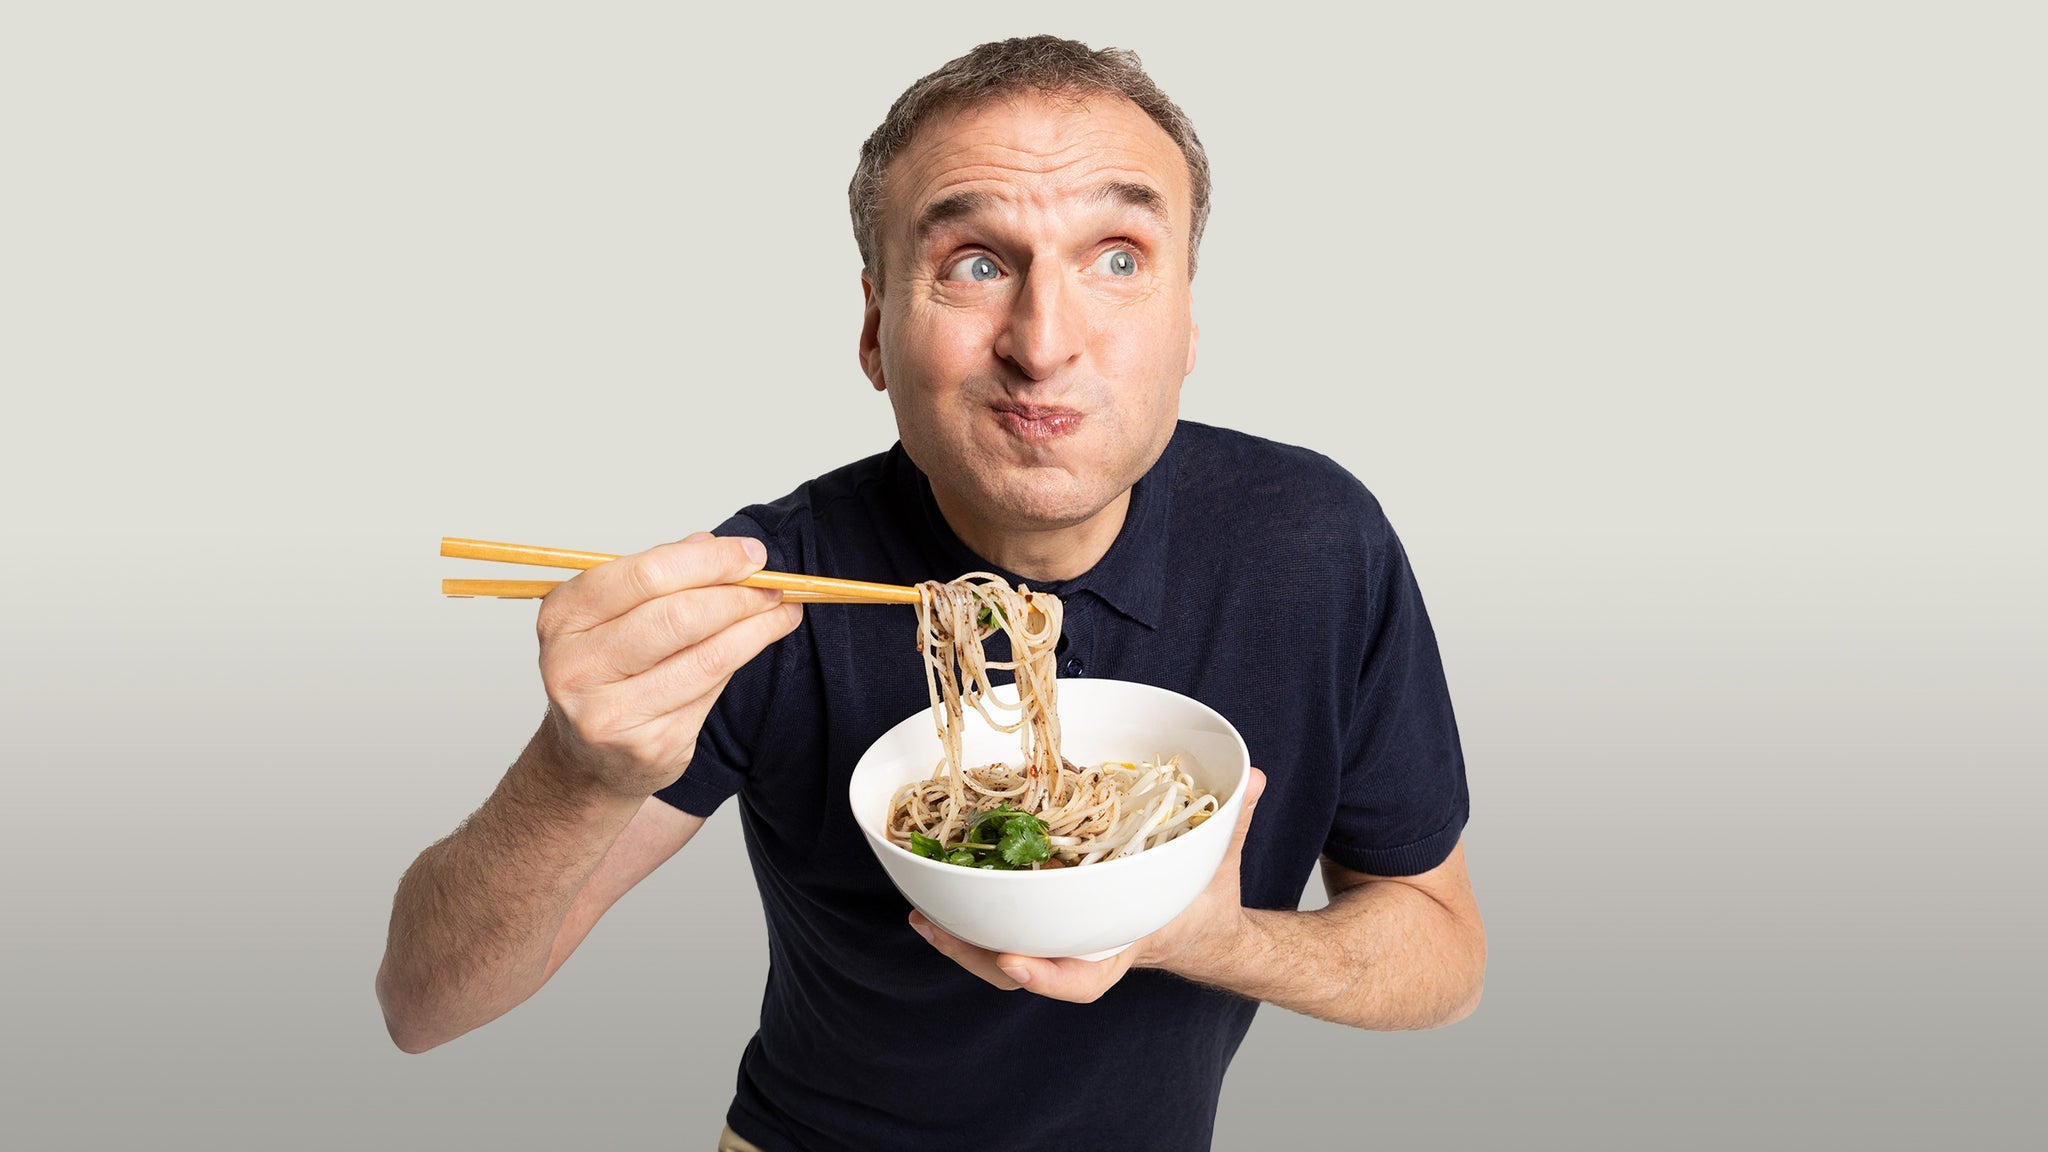 An Evening with Phil Rosenthal of Somebody Feed Phil presale password for advance tickets in Huntington